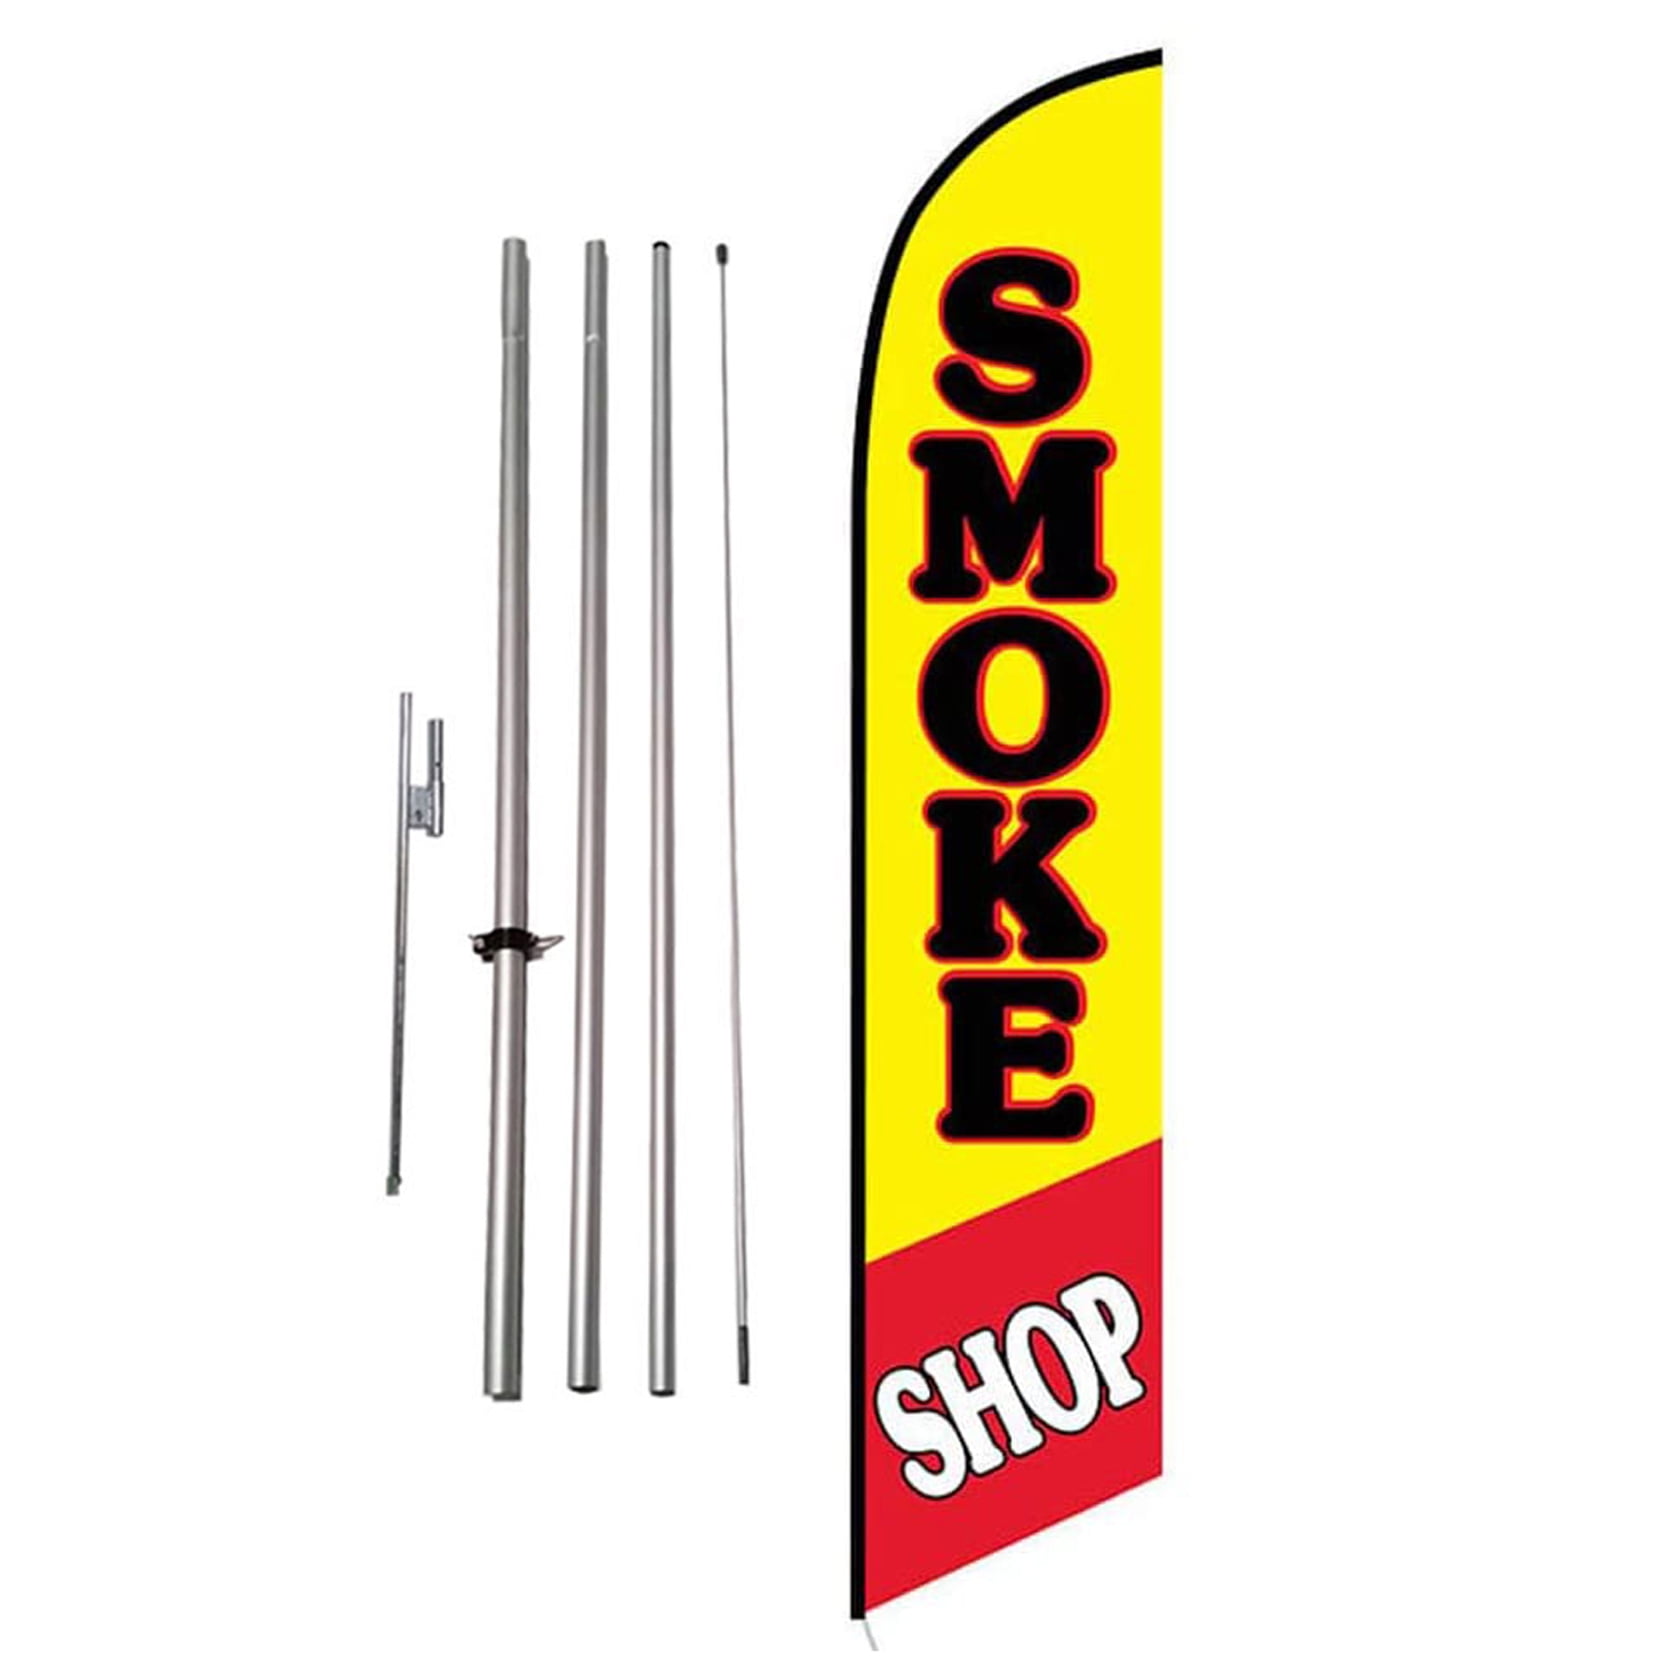 TWO Barber Shop 15 foot Swooper Feather Flag Sign 